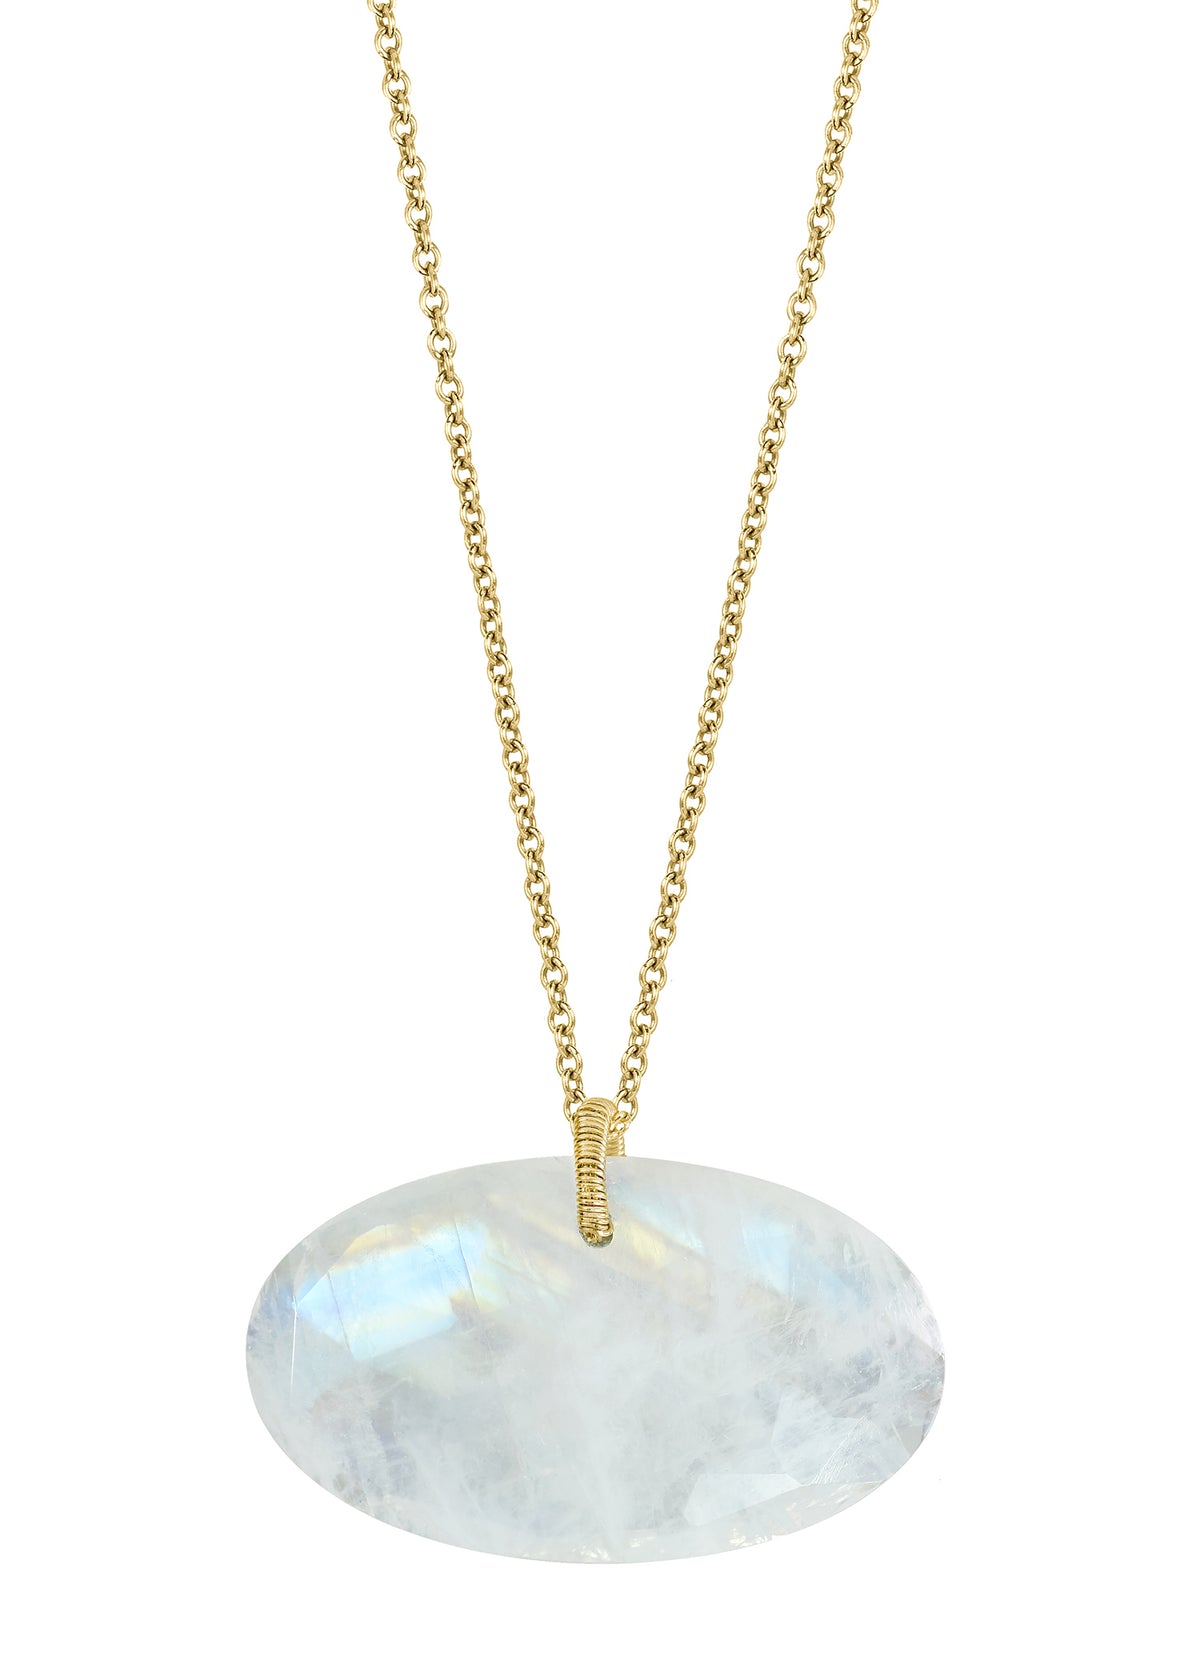 Rainbow moonstone 14k gold Special order only Necklace measures 16&quot; in length Pendant measures 3/4&quot; in length and 1-1/8&quot; in width Handmade in our Los Angeles studio